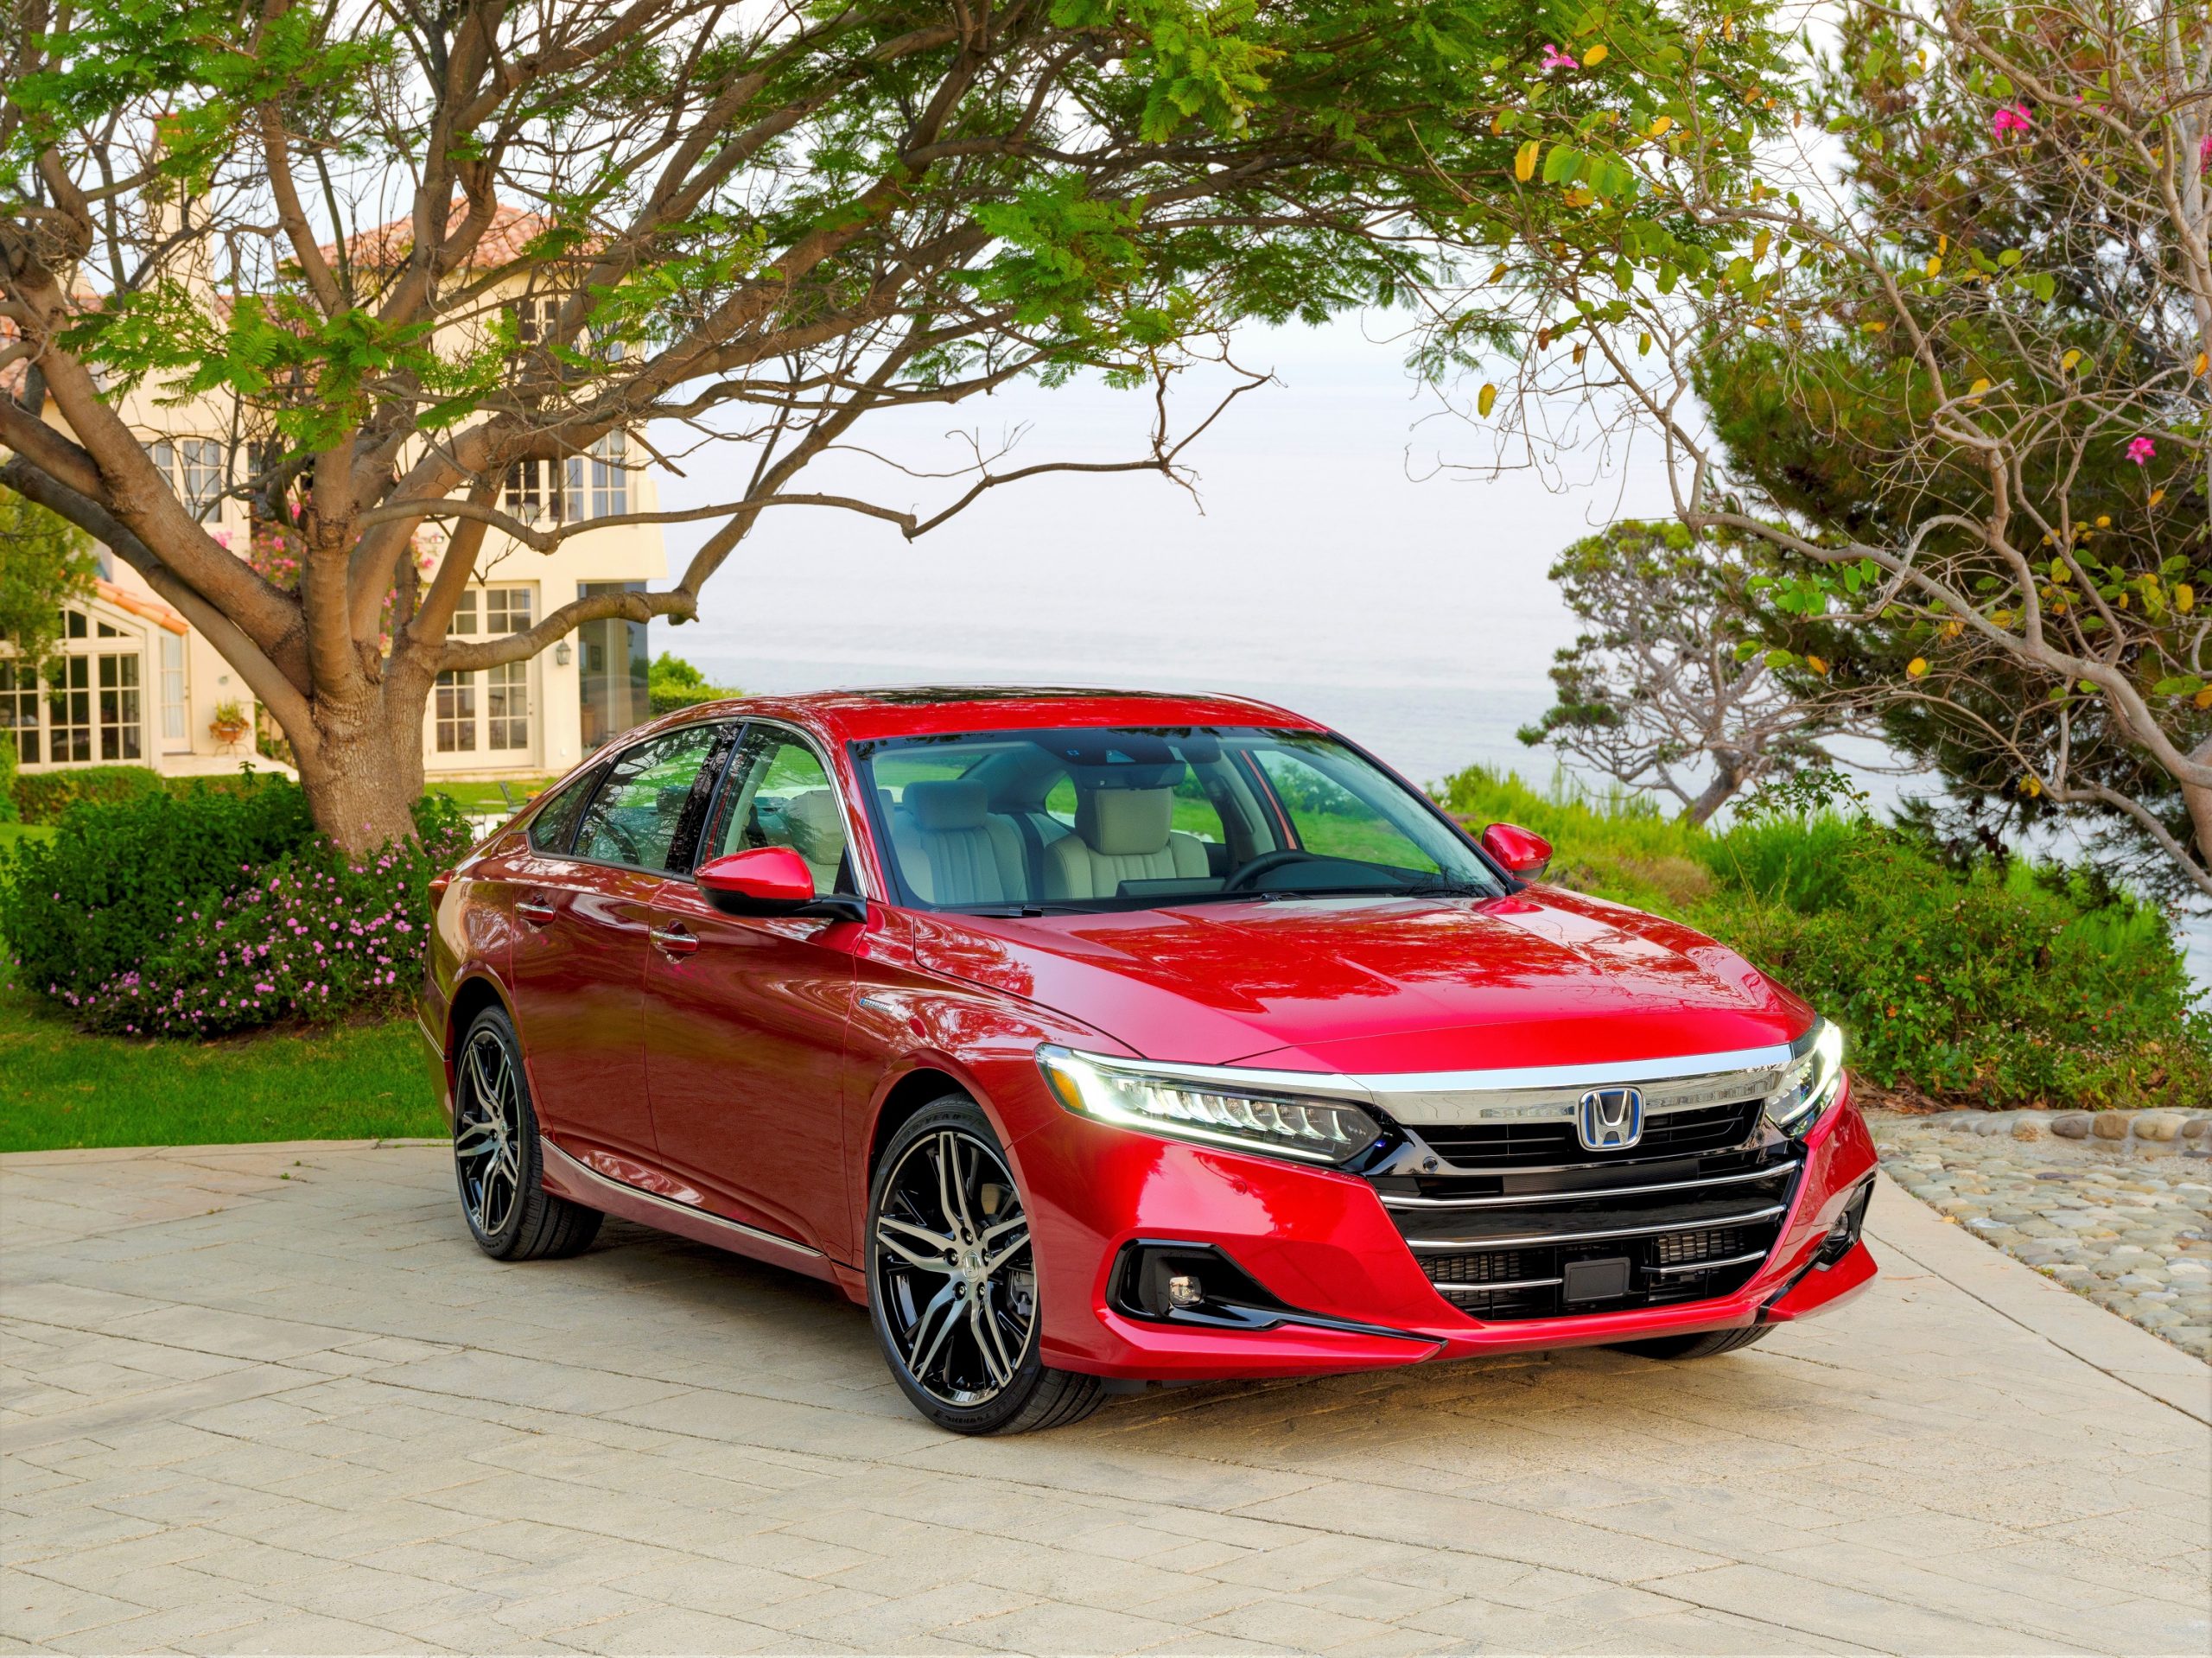 A 3/4 shot of the new Honda Accord in red